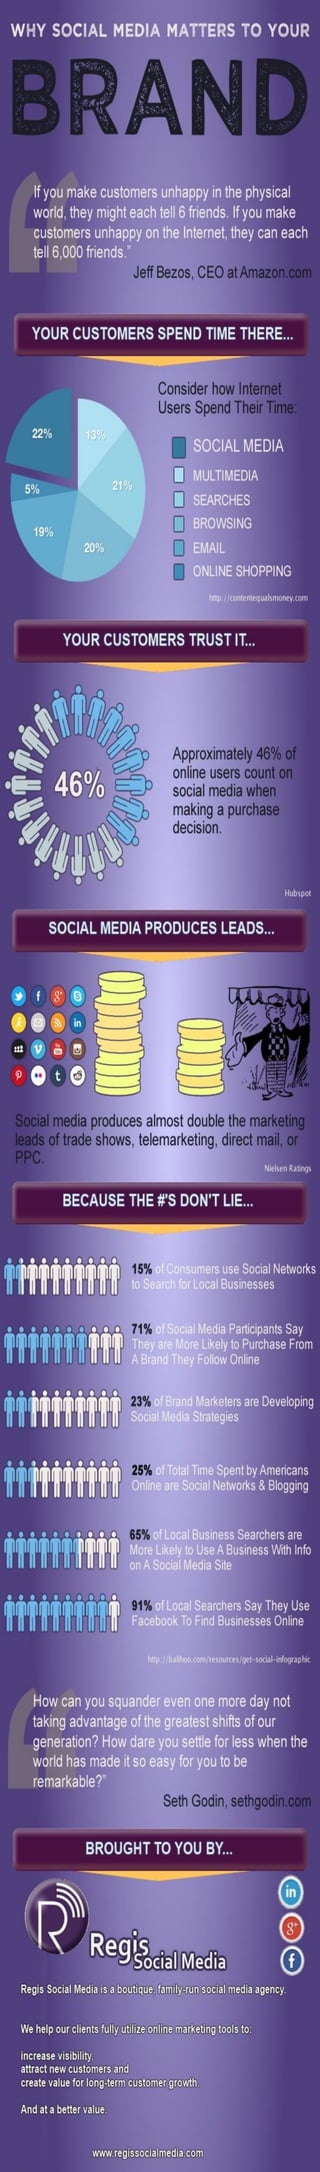 Social media matters to your brand